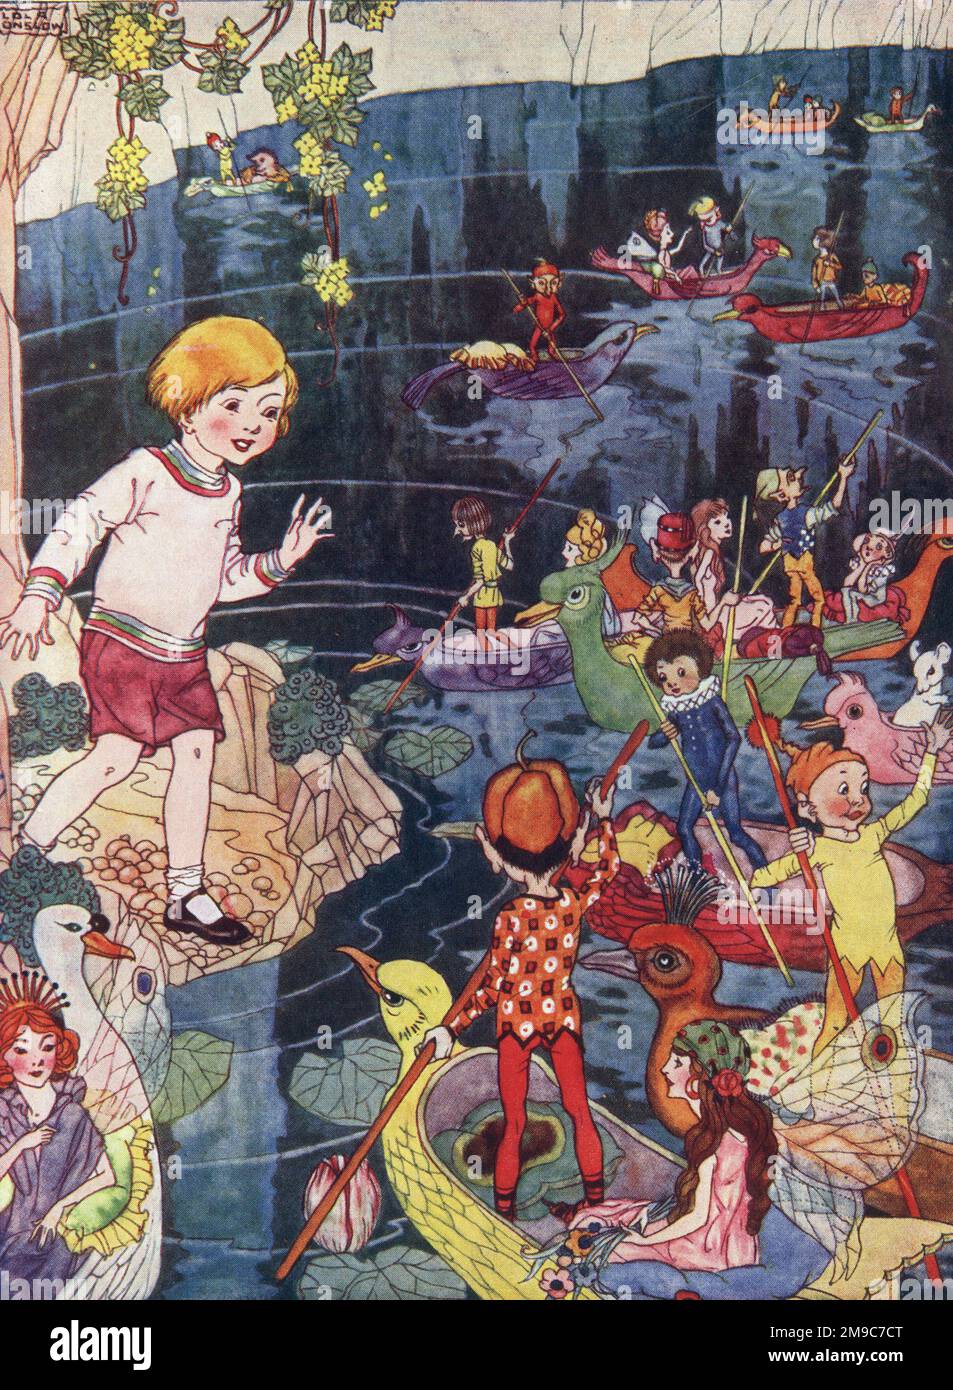 Illustration, How Lovely, cried Pat, It's a Fairy Lake, by Lola Onslow Stock Photo